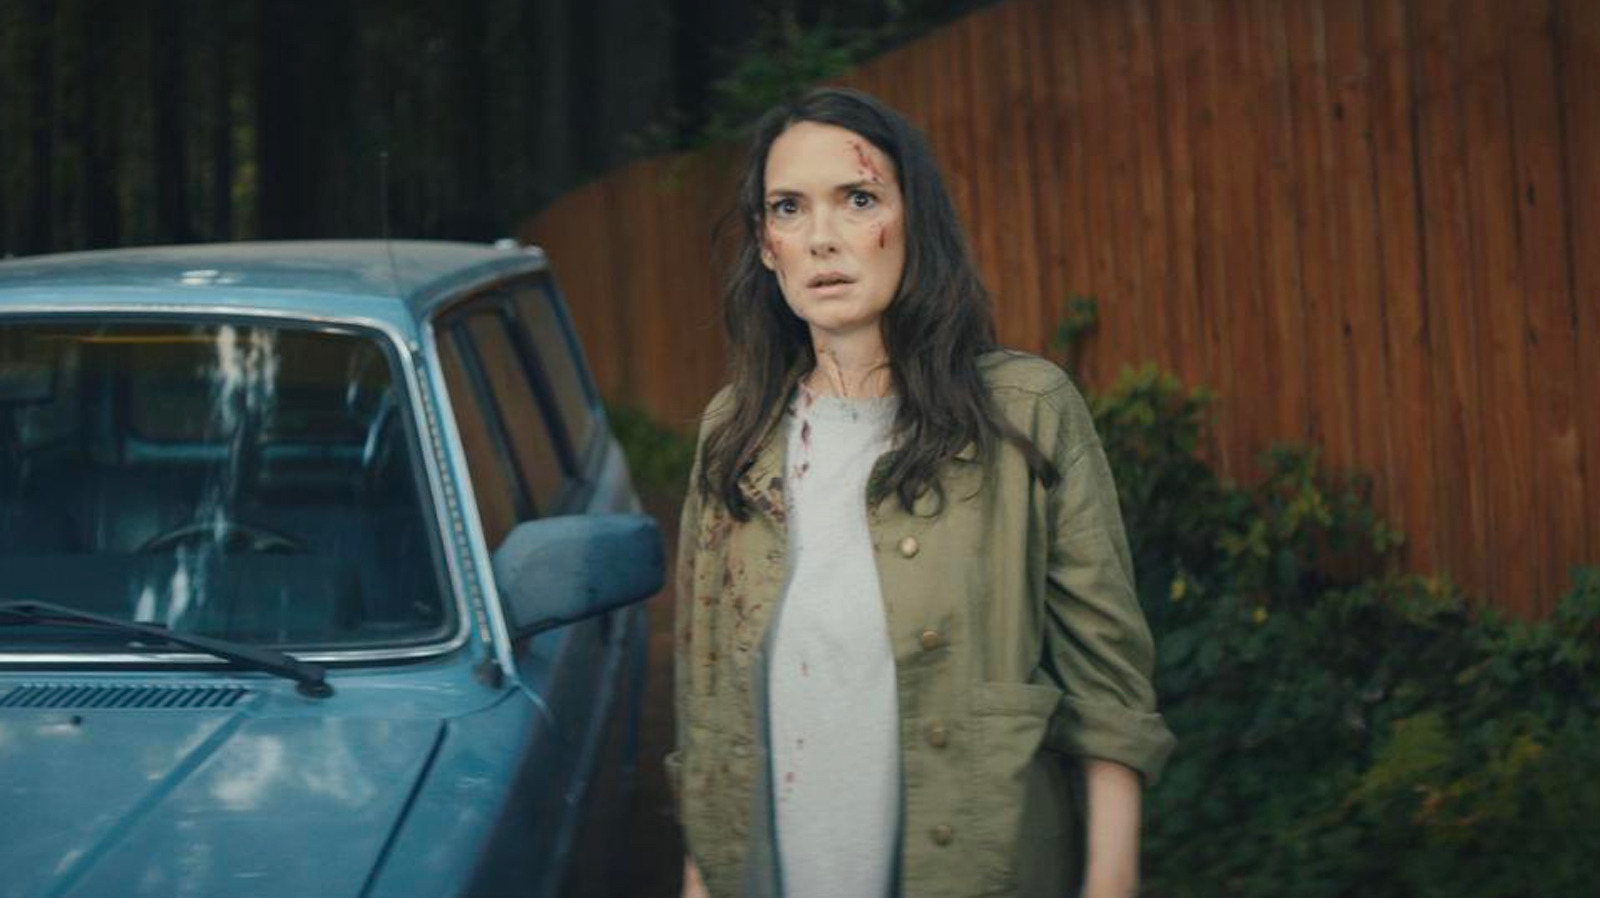 #Winona Ryder Goes Through A Bad Breakup In This Unfocused Thriller [SXSW]